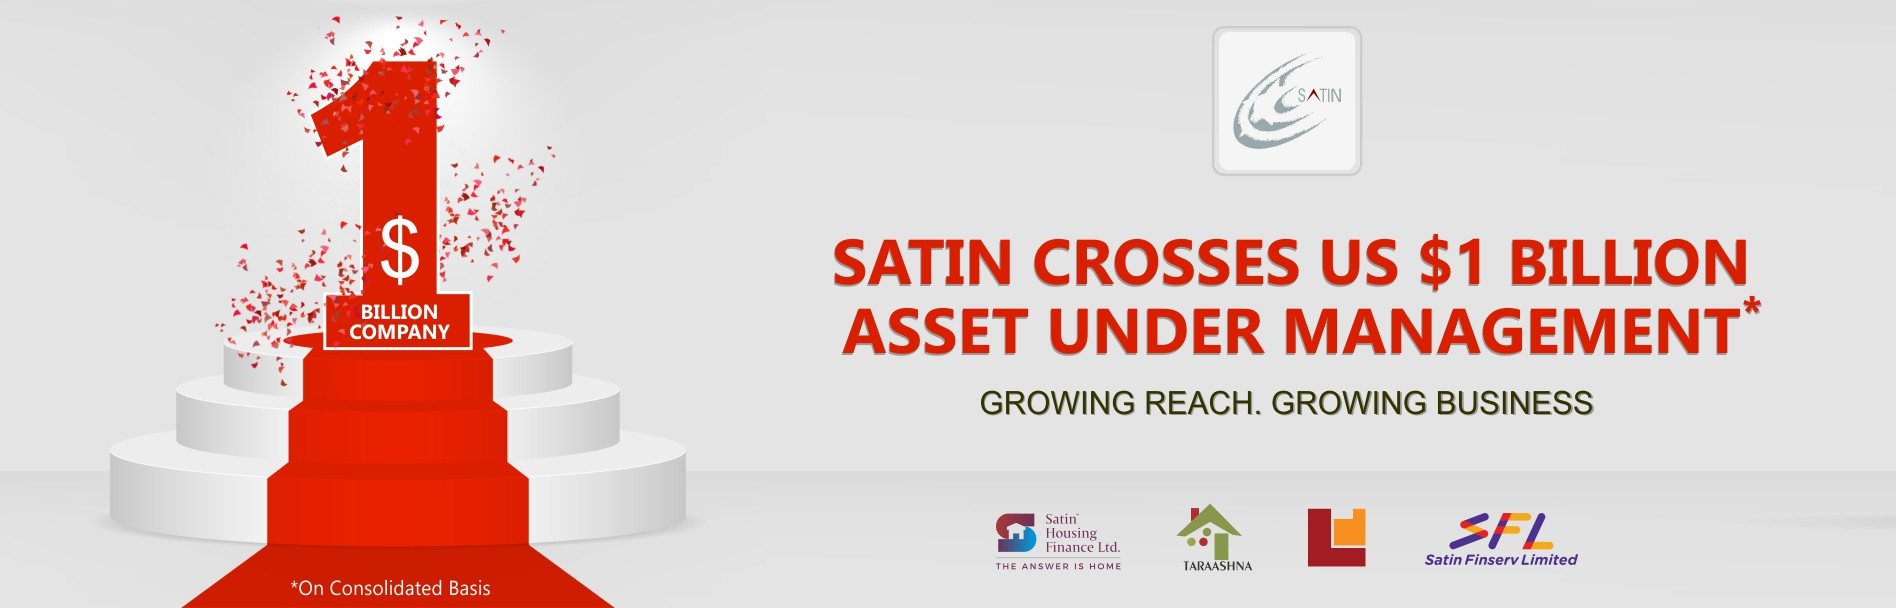 satin-creditcare-networks-loan-dost-to-now-offer-up-to-rs-1-5-lakhs-loan-to-self-employed